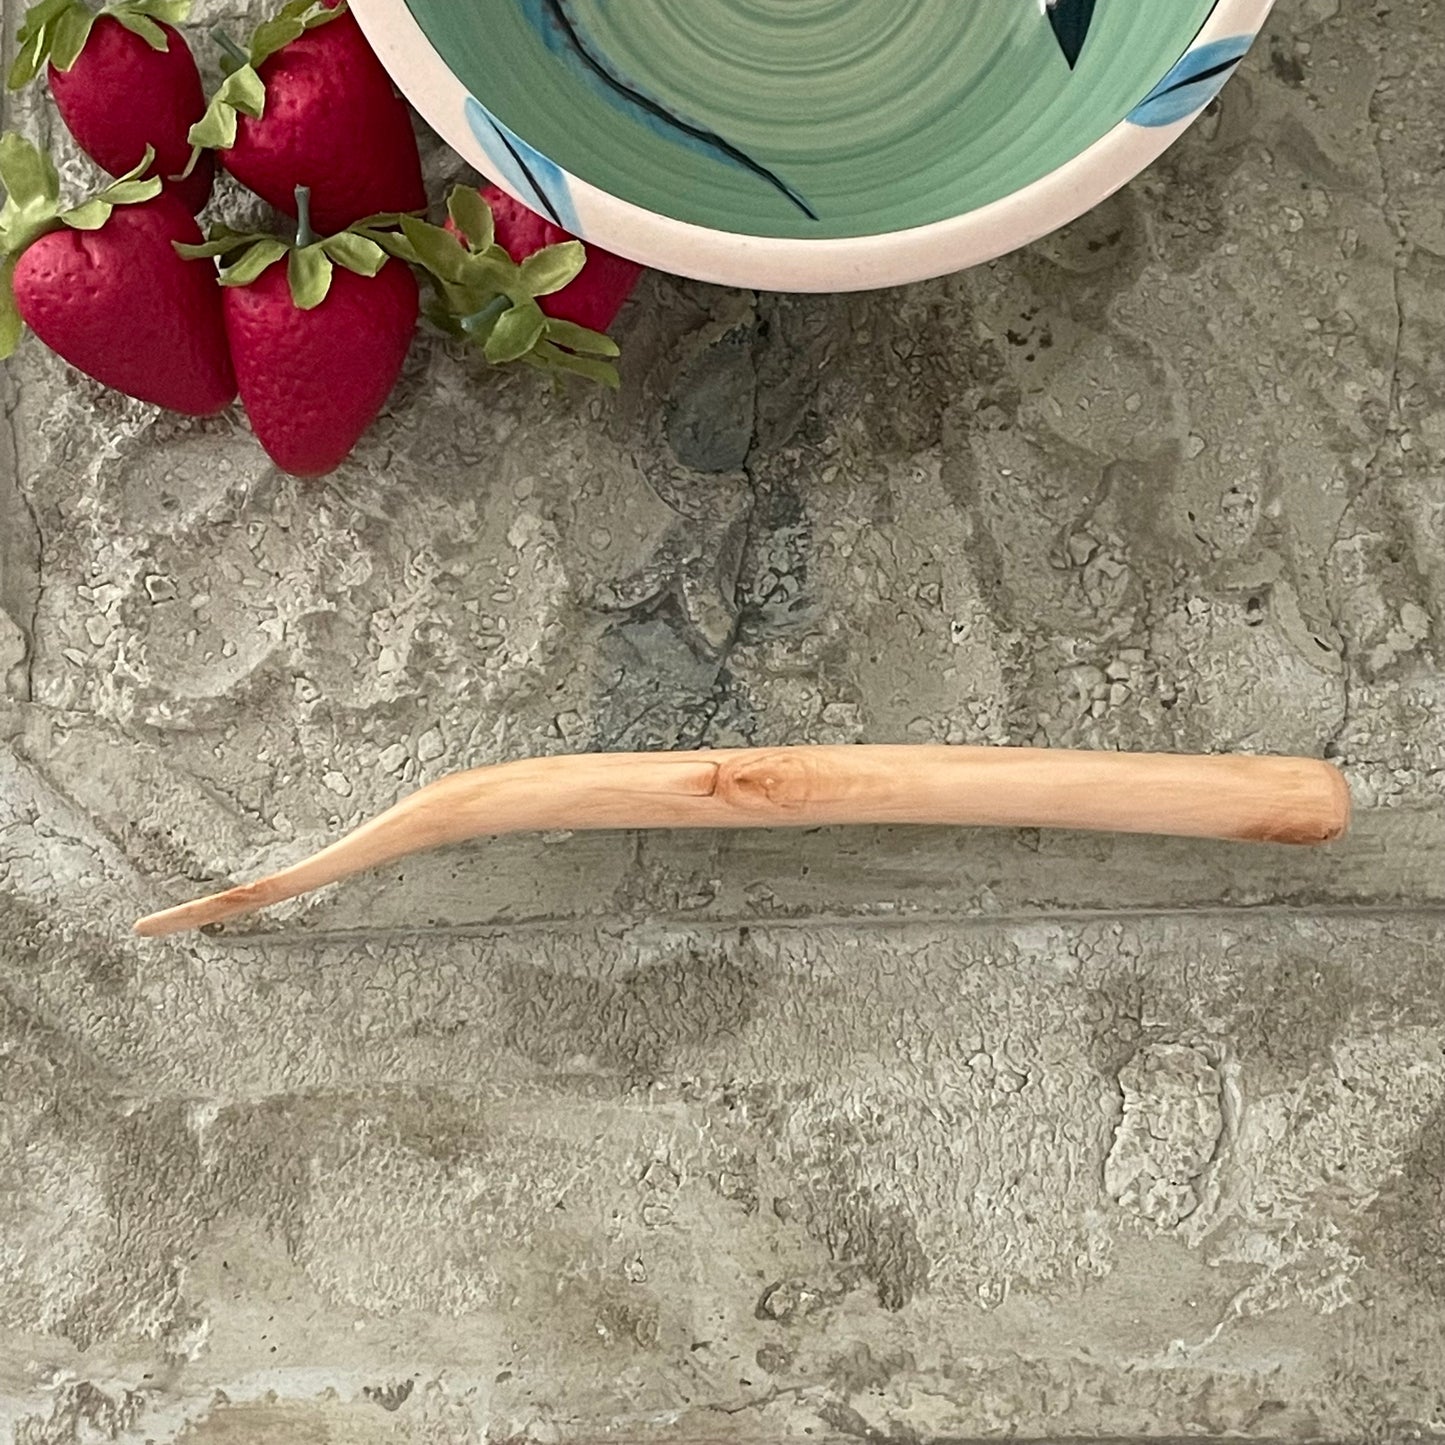 Rustic Rounded Handle Narrowed End Scottish Spurtle Cherry 9" Reclaimed Wood Kitchen Utensil Handmade Hot Drinks Oatmeal Grits